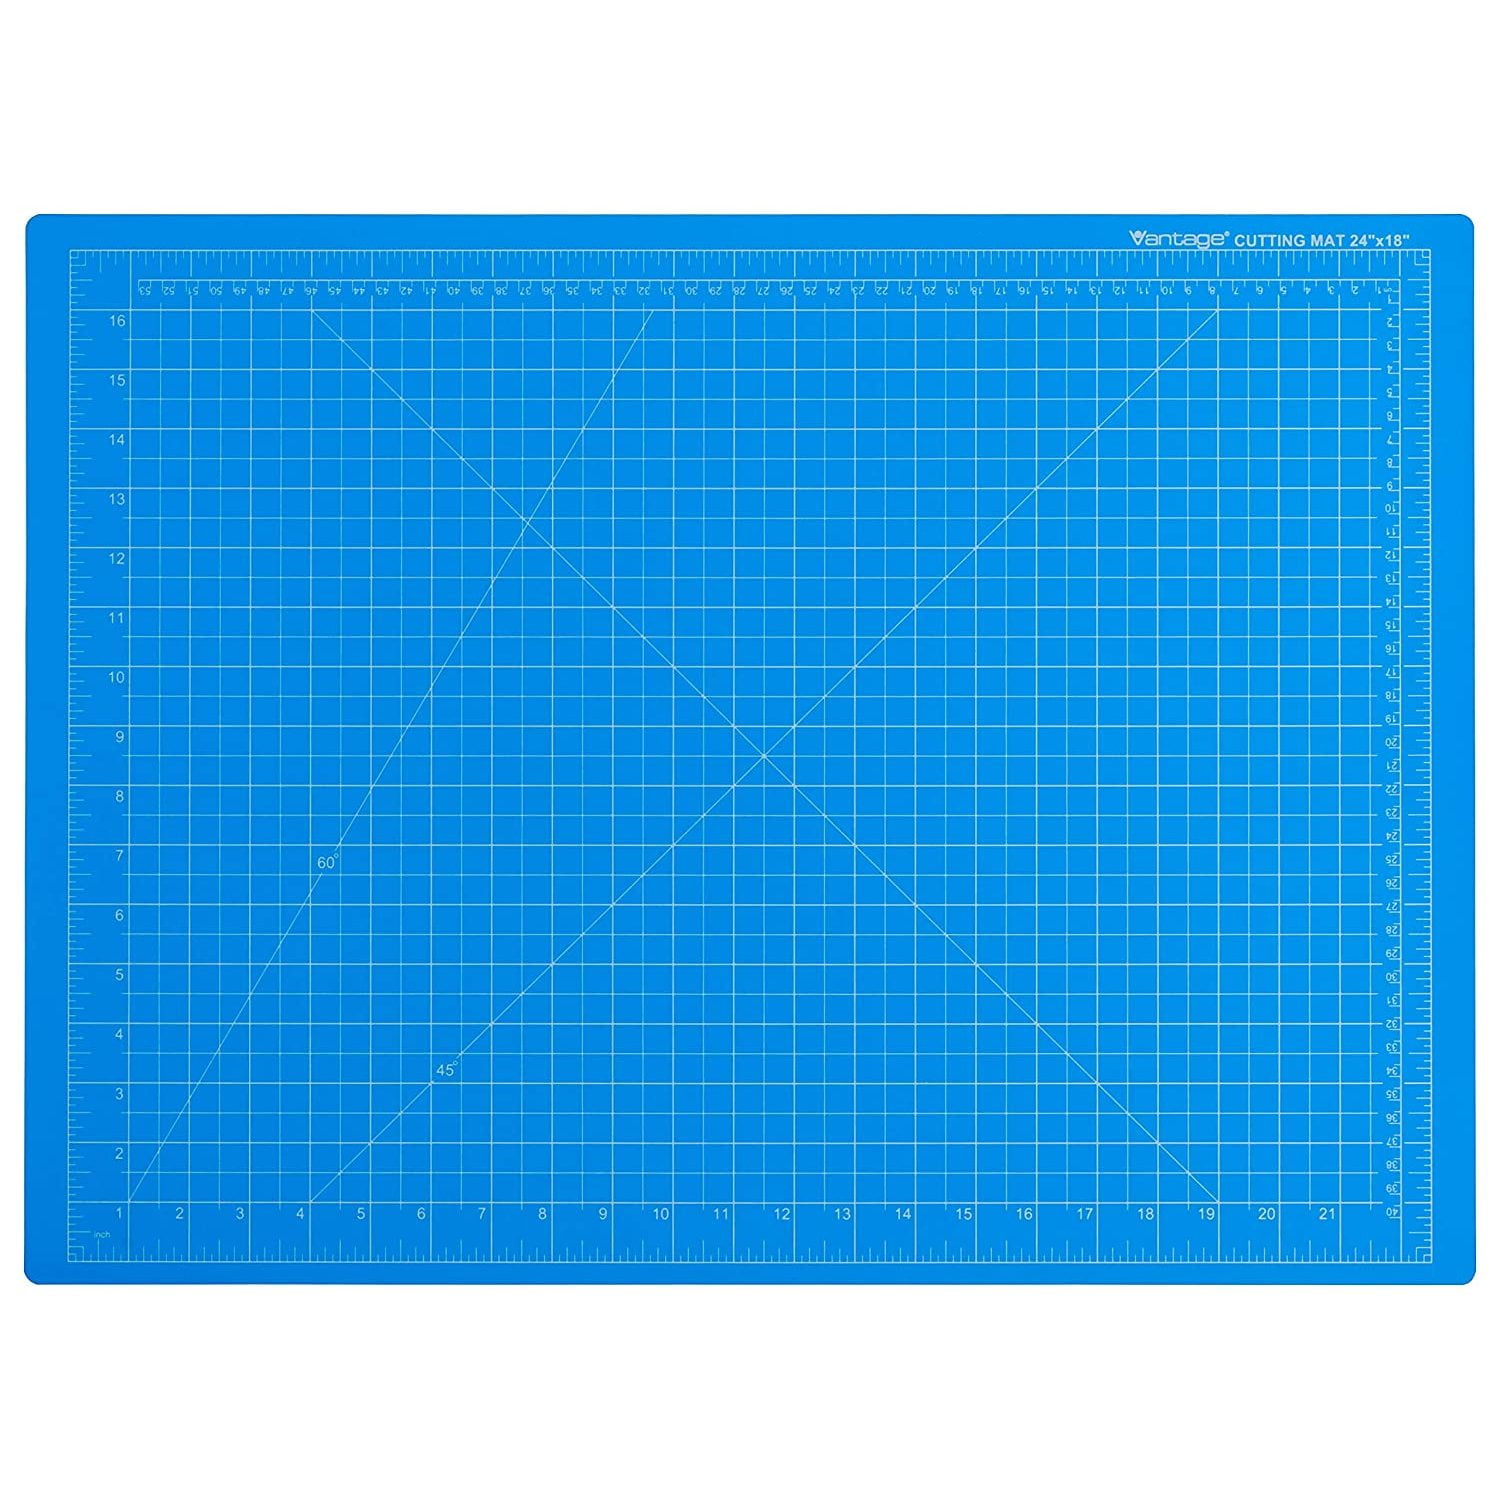 Vantage 10673 Self-Healing Cutting Mat, 24x36, 1/2 Grid, Layers for Max  Healing, Perfect for Crafts  Sewing, Black, [SELF-HEALING] -- 5-layer  de...